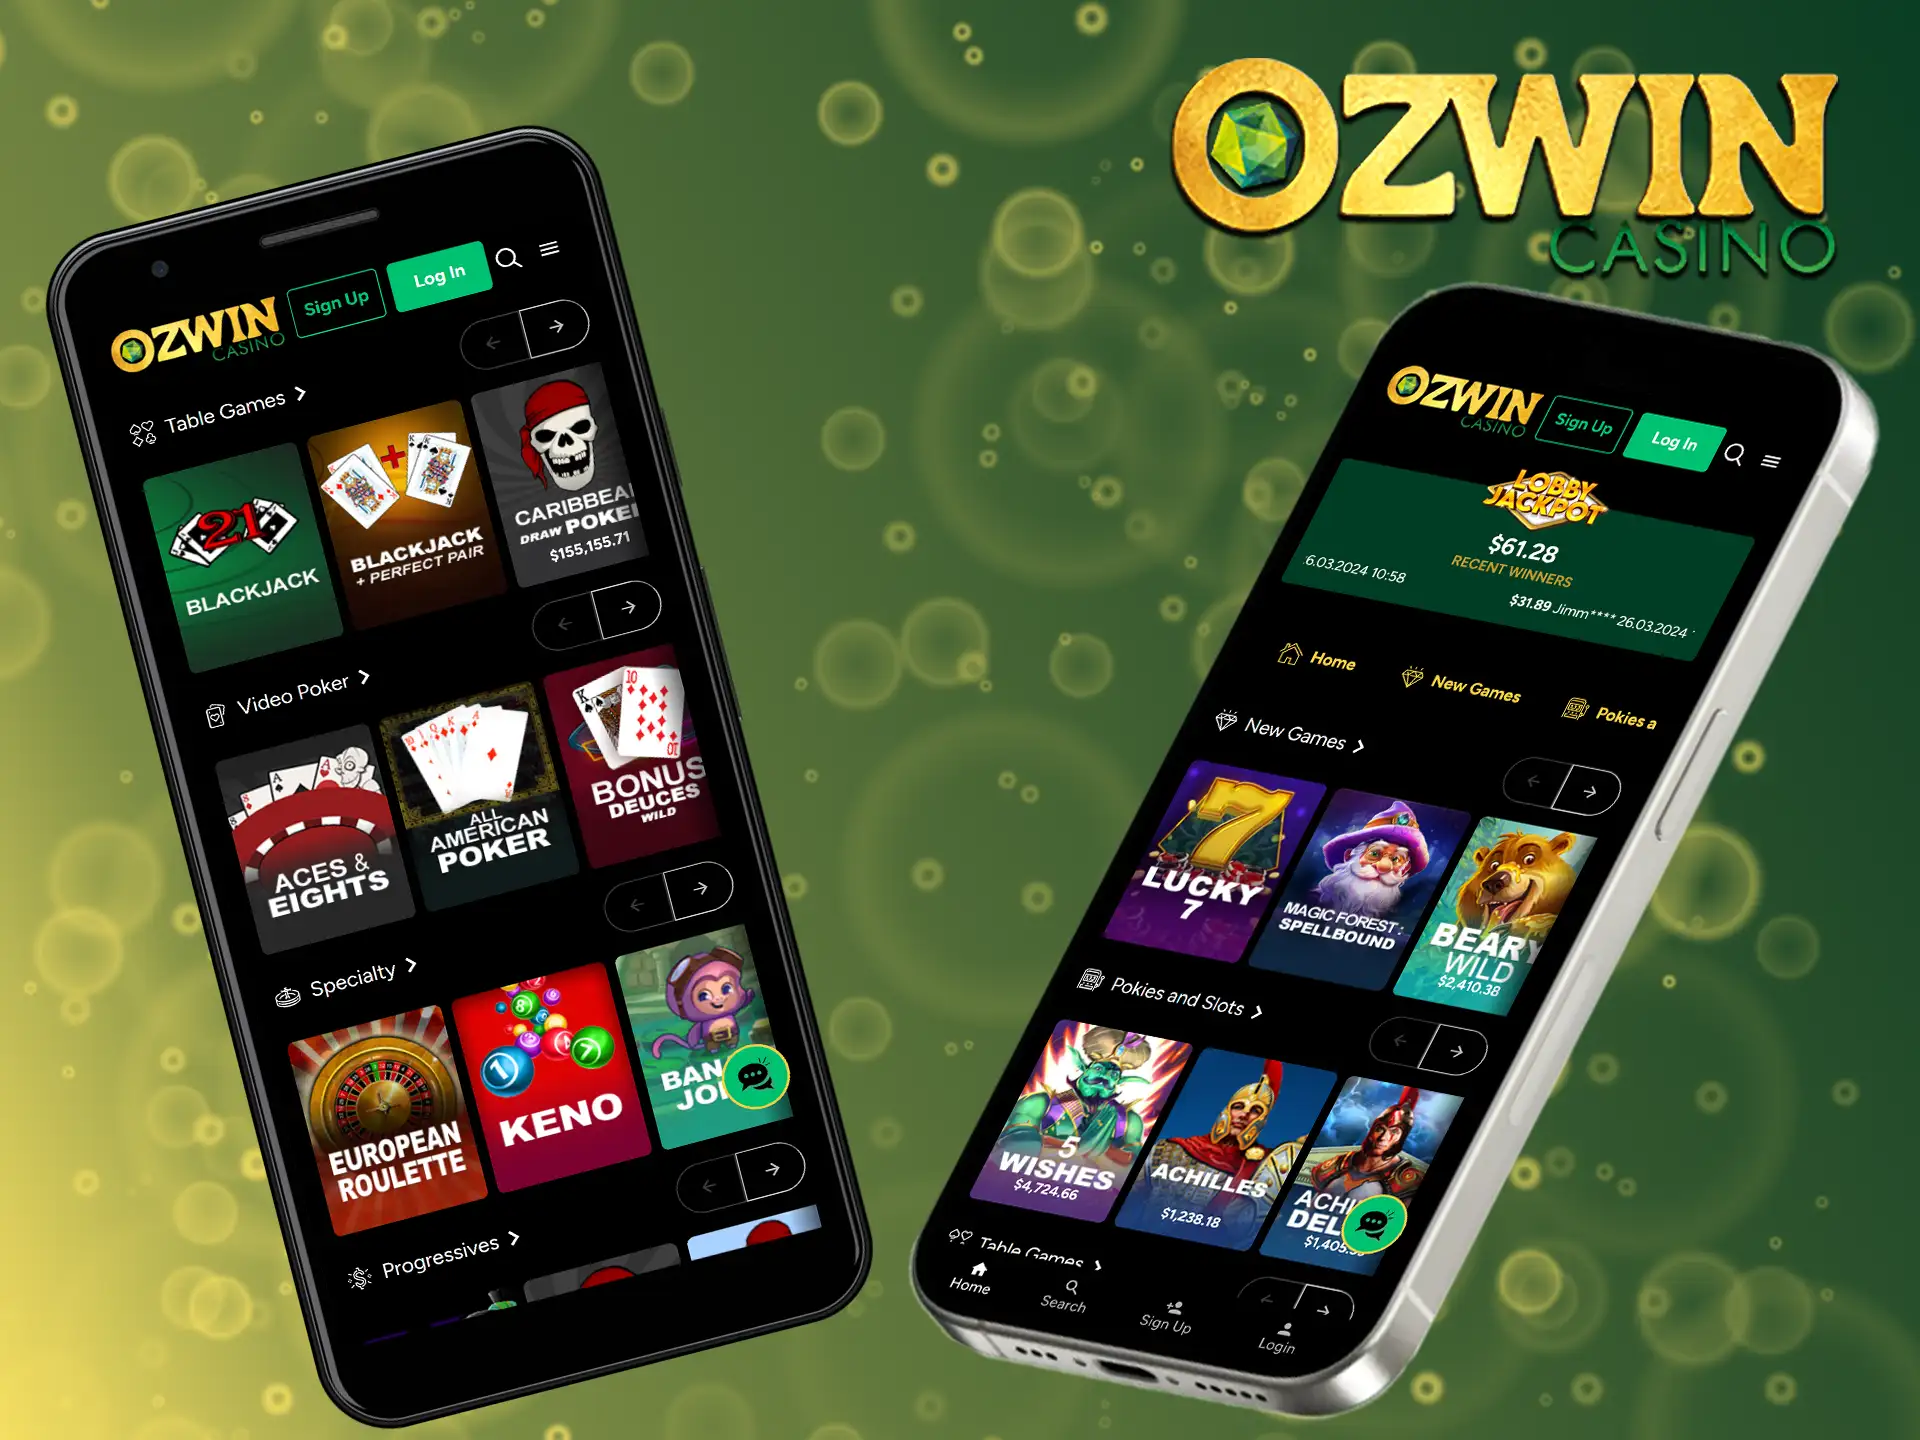 Enjoy the thrill of Ozwin Casino games on your favorite device.